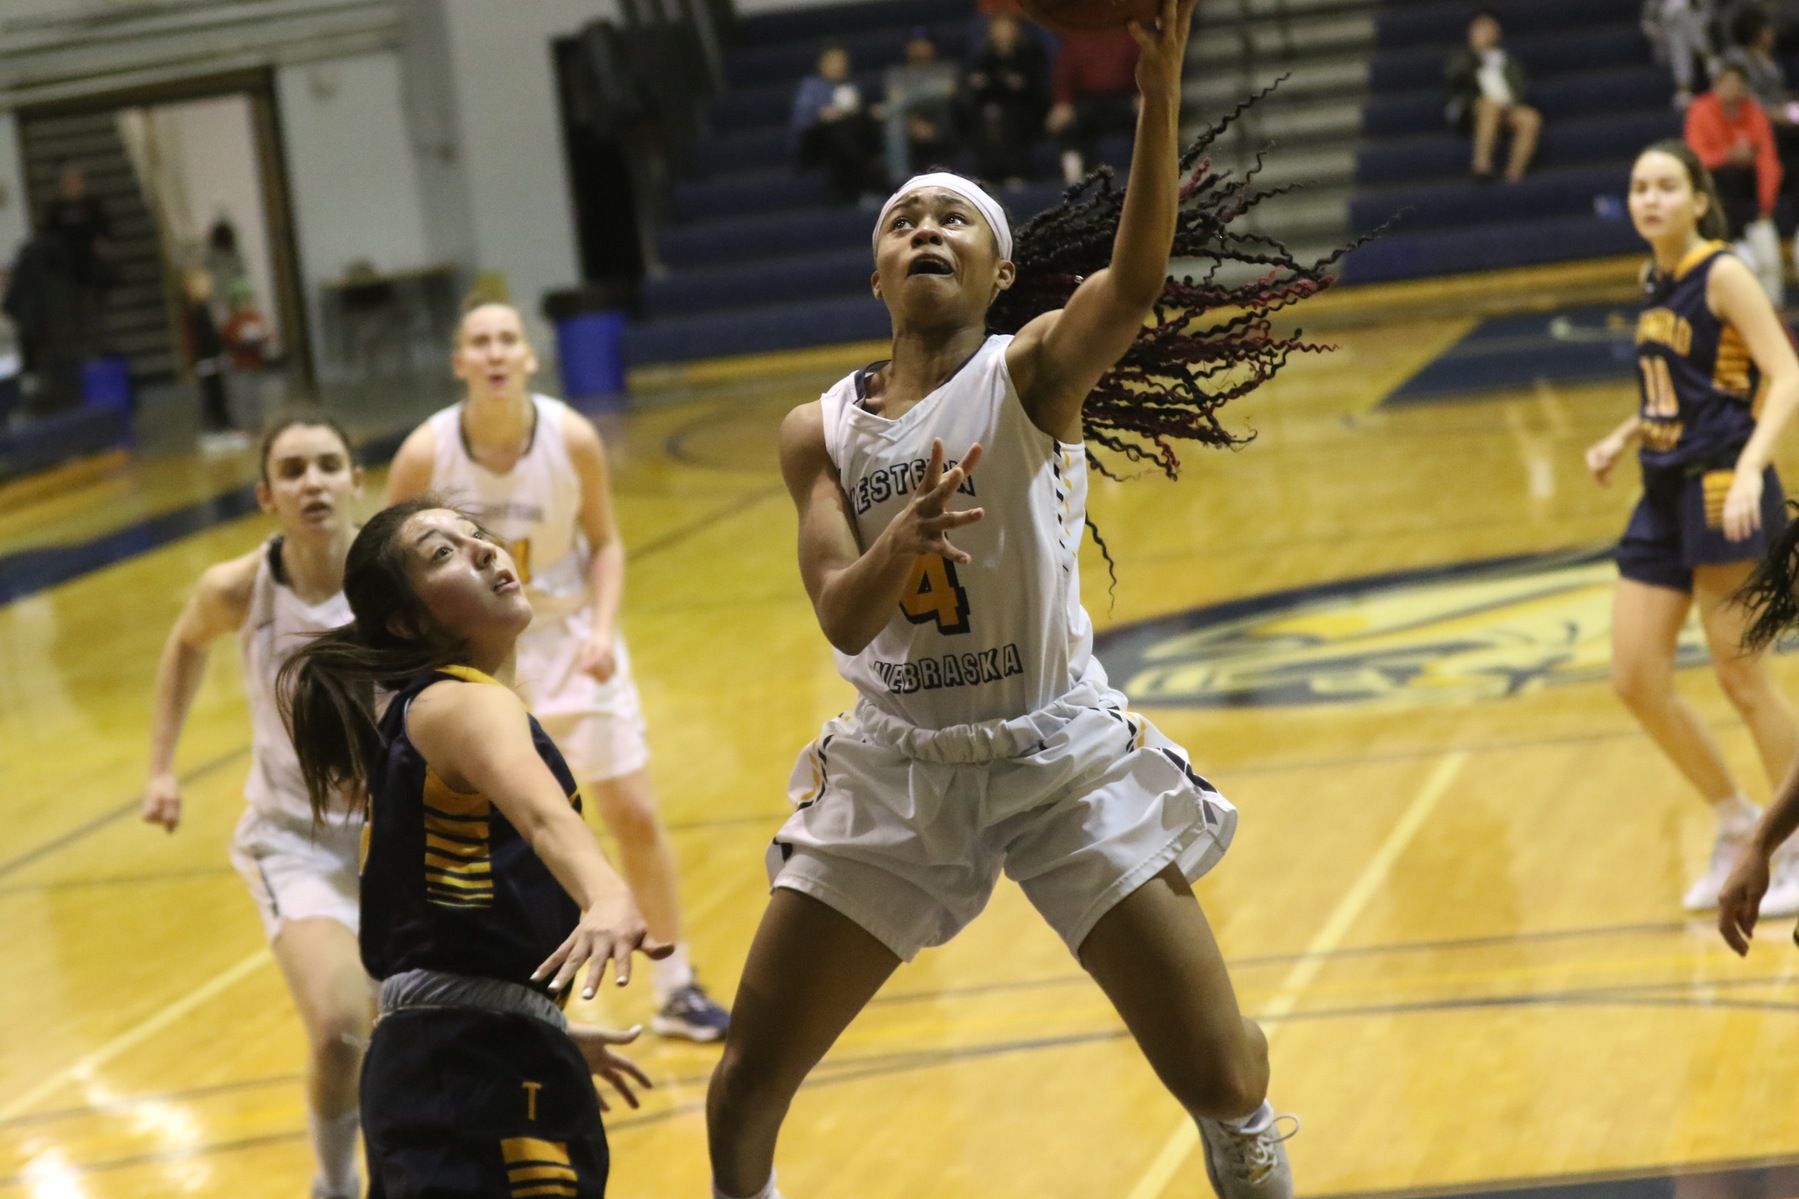 WNCC’s Morehouse earns First Team All-American honors